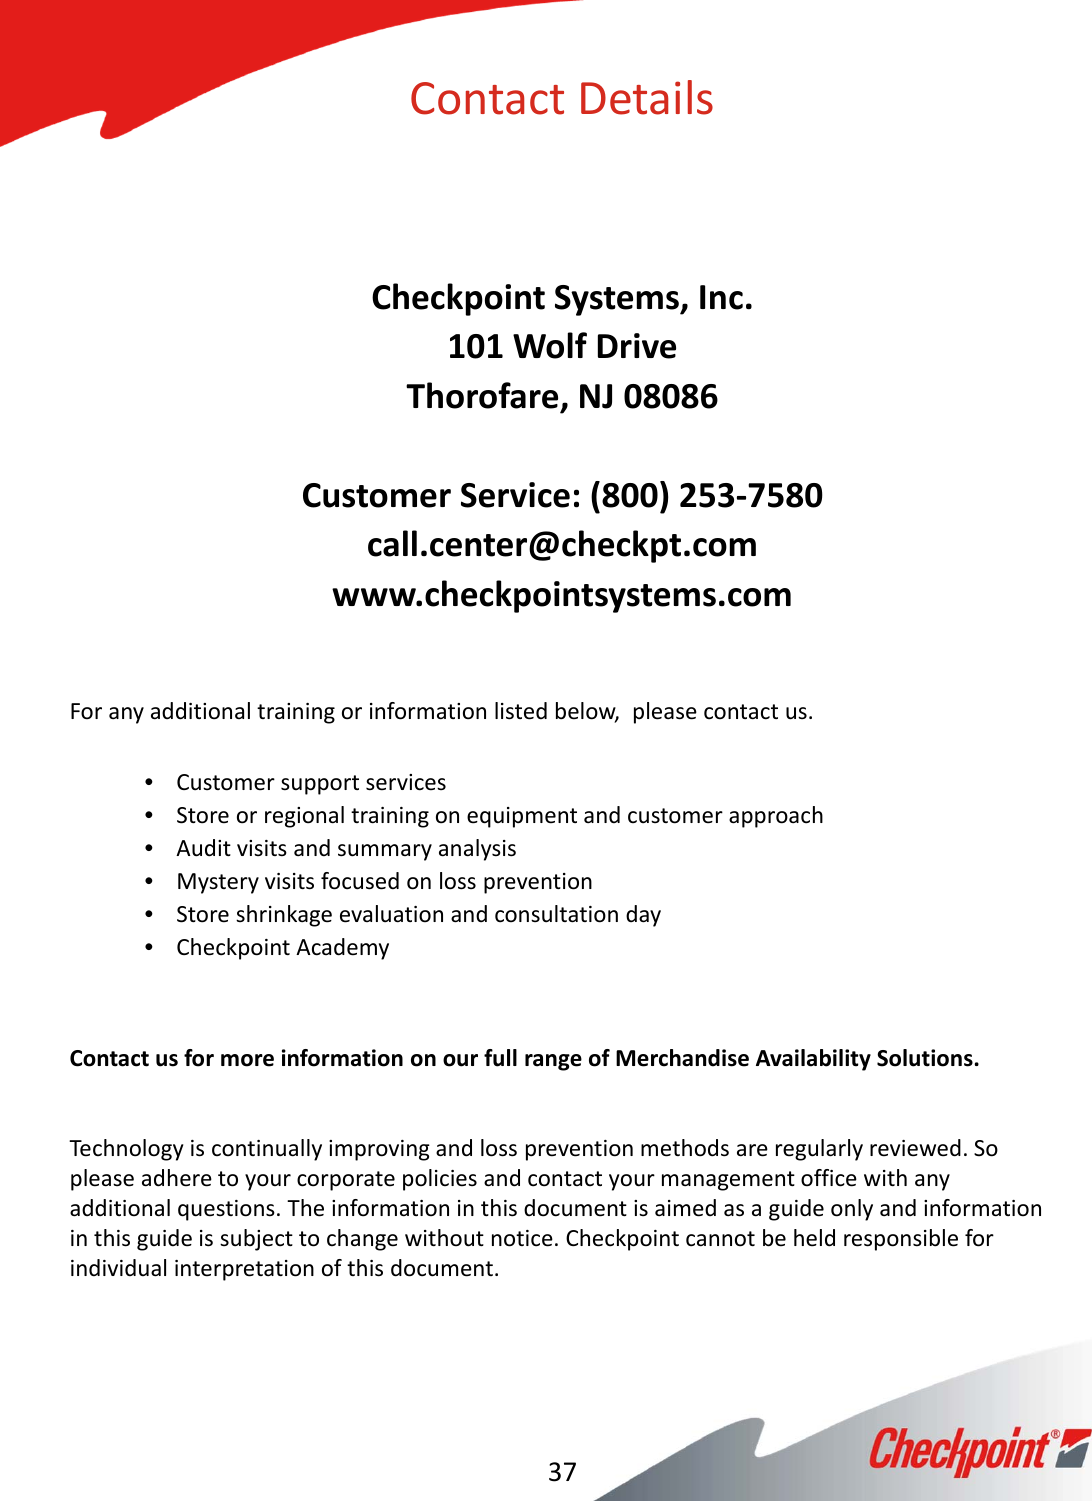 CheckpointSystems,Inc.101WolfDriveThorofare,NJ08086CustomerService:(800)253‐7580call.center@checkpt.comwww.checkpointsystems.comForanyadditionaltrainingorinformationlistedbelow,pleasecontactus.•Customersupportservices•Storeorregionaltrainingonequipmentandcustomerapproach•Auditvisitsandsummaryanalysis•Mysteryvisitsfocusedonlossprevention•Storeshrinkageevaluationandconsultationday•CheckpointAcademyContactusformoreinformationonourfullrangeofMerchandiseAvailabilitySolutions.Technologyiscontinuallyimprovingandlosspreventionmethodsareregularlyreviewed.Sopleaseadheretoyourcorporatepoliciesandcontactyourmanagementofficewithanyadditionalquestions.Theinformationinthisdocumentisaimedasaguideonlyandinformationinthisguideissubjecttochangewithoutnotice.Checkpointcannotbeheldresponsibleforindividualinterpretationofthisdocument.37ContactDetails